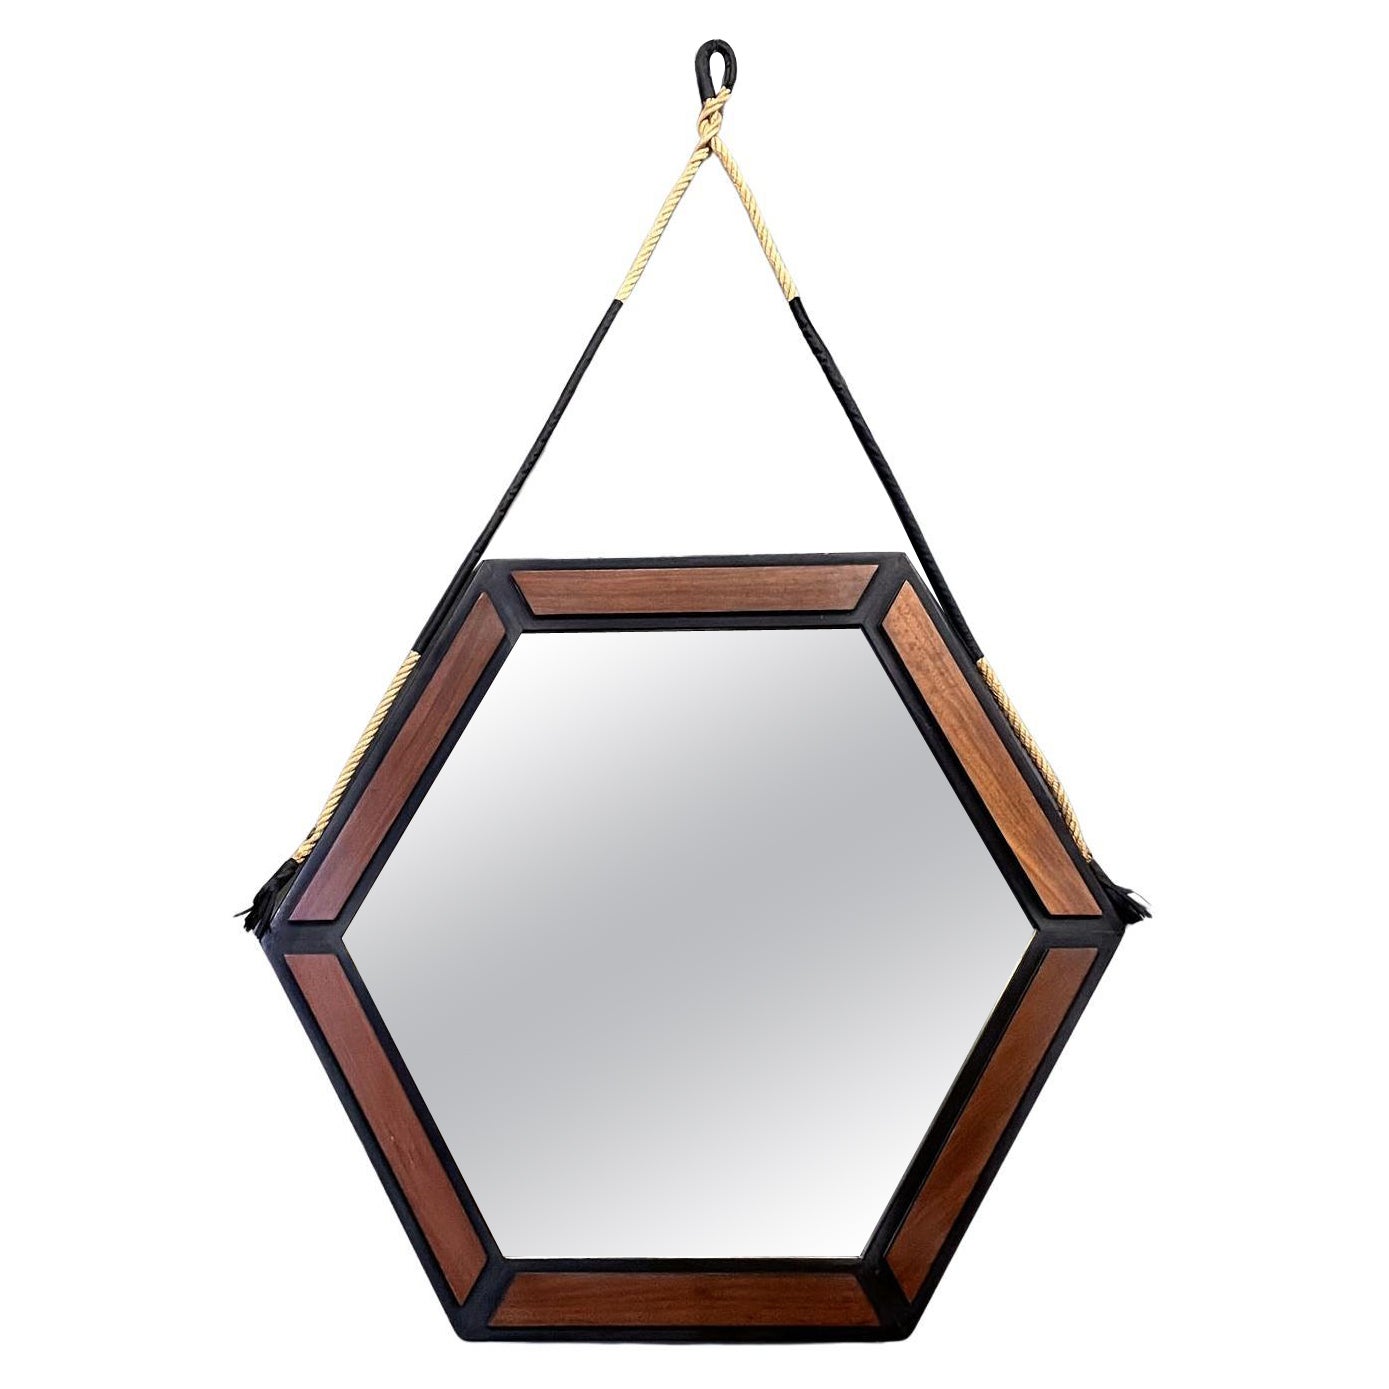 Italian mid-century modern hexagonal wooden wall mirror with rope, 1960s For Sale